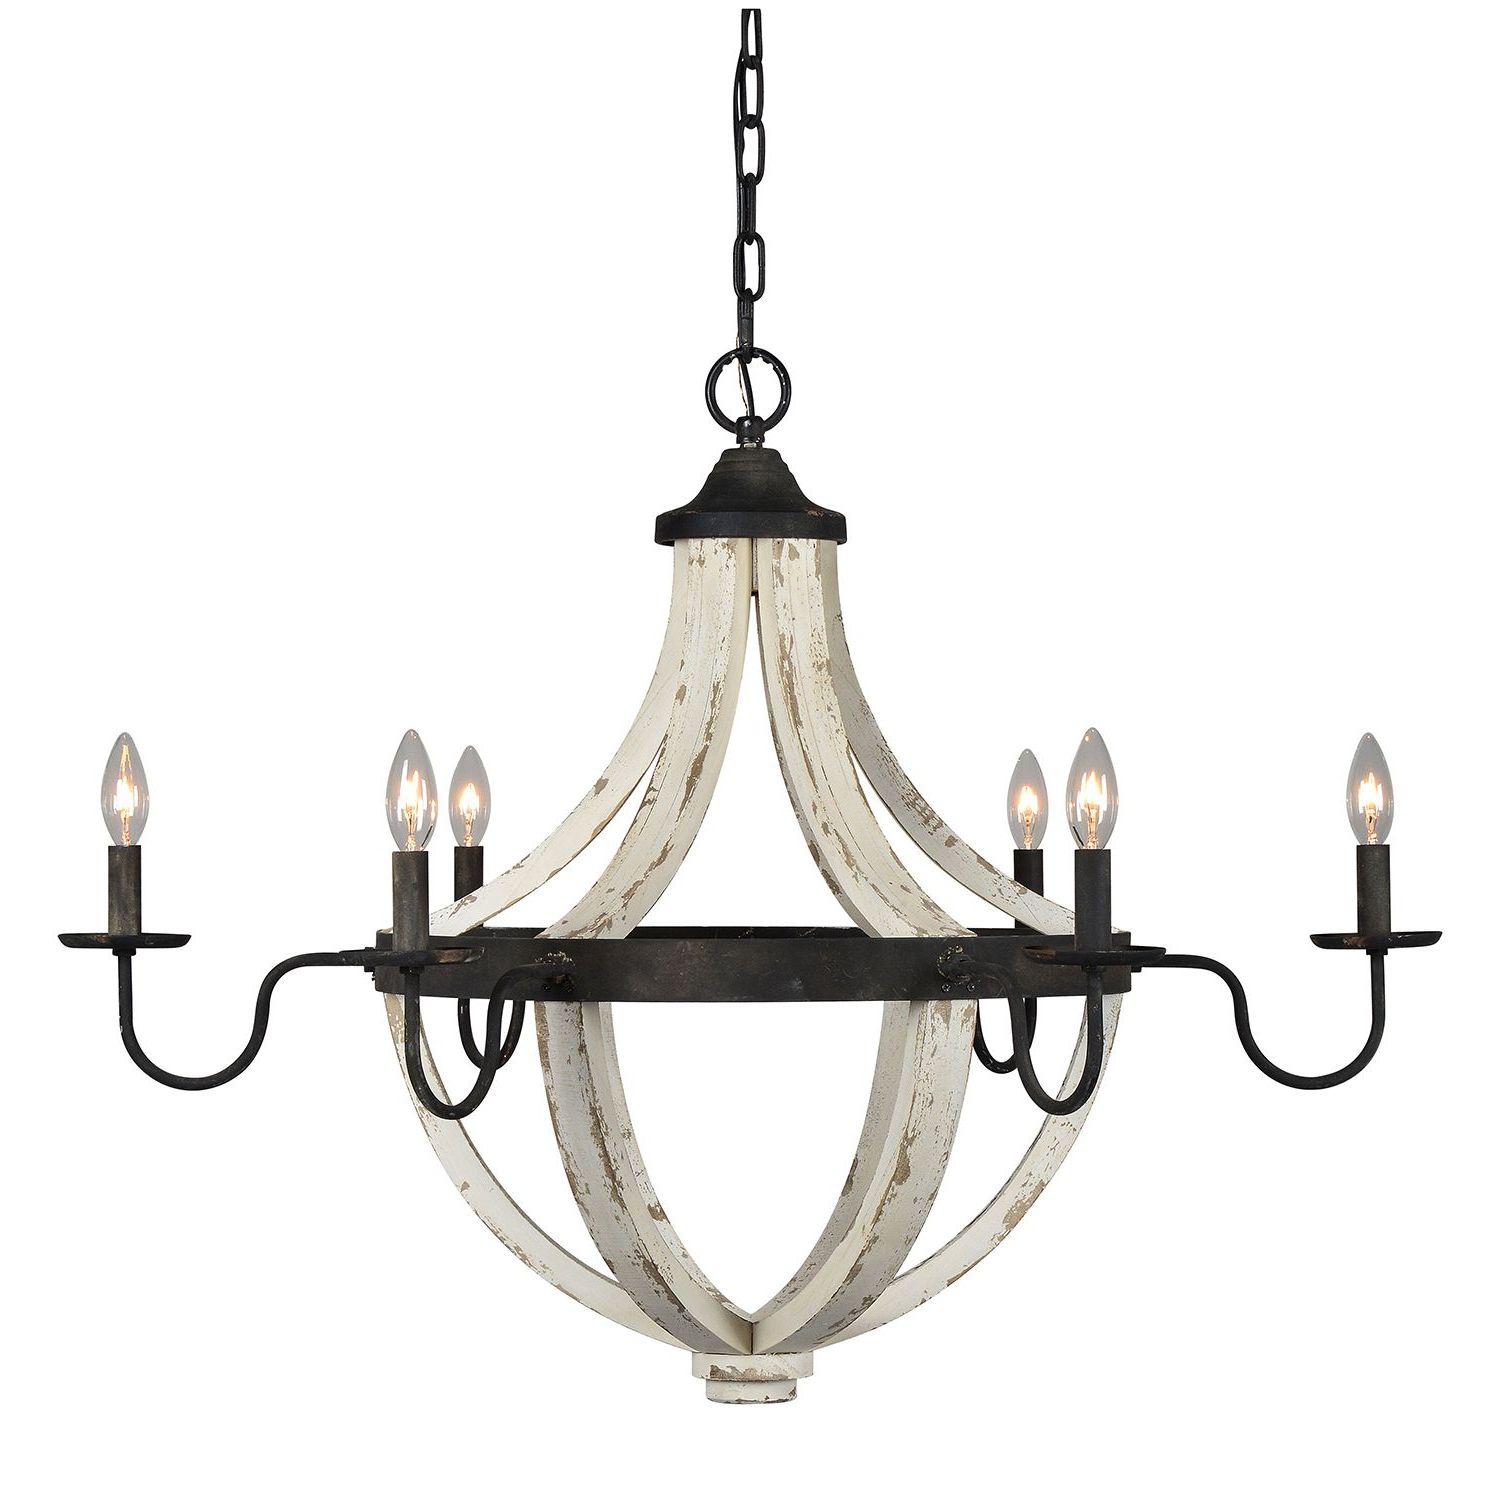 Rustic Black Chandeliers For Most Popular Forty West Rice Rustic Black And Cottage White Chandelier (View 6 of 20)